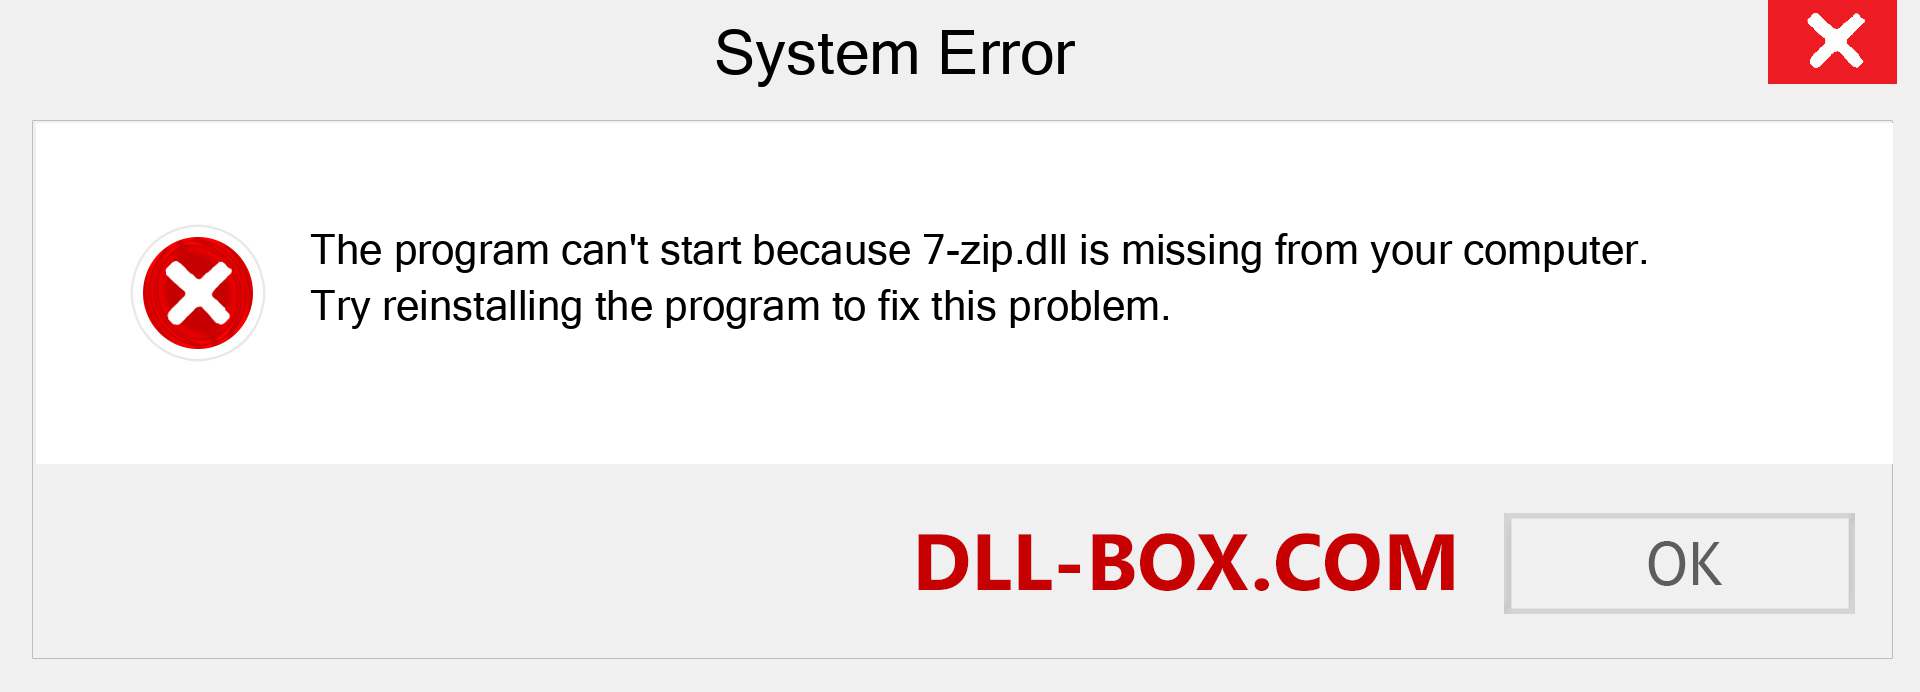  7-zip.dll file is missing?. Download for Windows 7, 8, 10 - Fix  7-zip dll Missing Error on Windows, photos, images